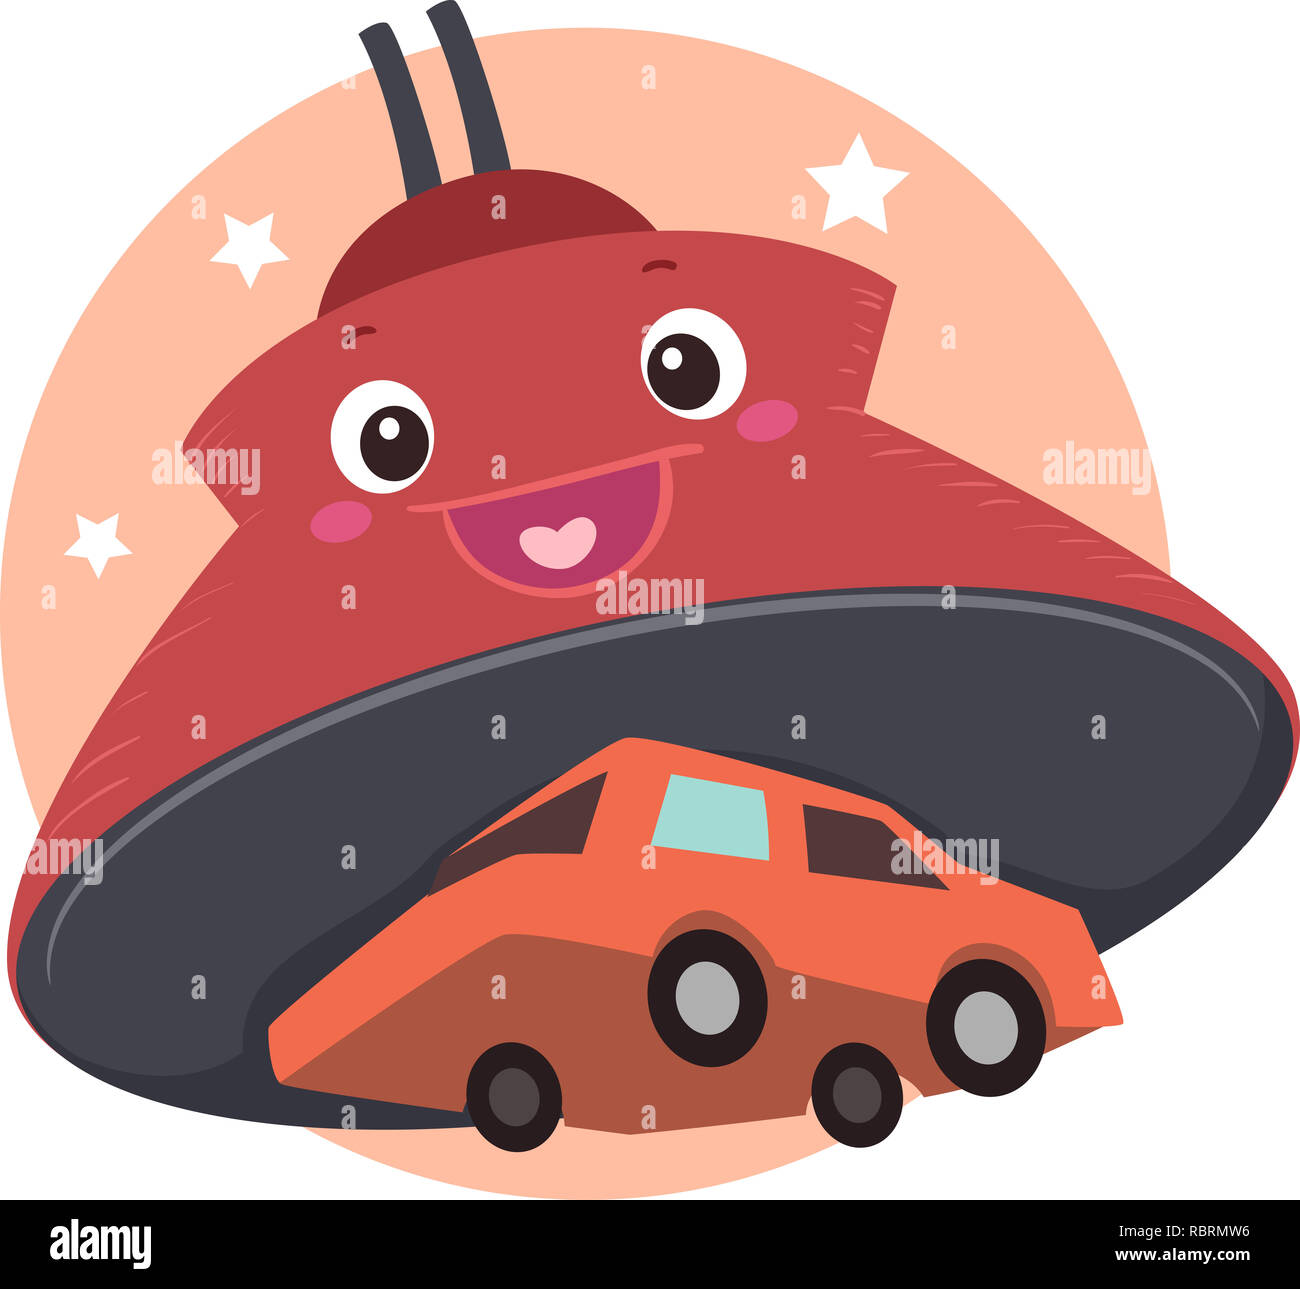 Illustration of a Crane Magnet Mascot Lifting a Used Car in the Junkyard  Stock Photo - Alamy